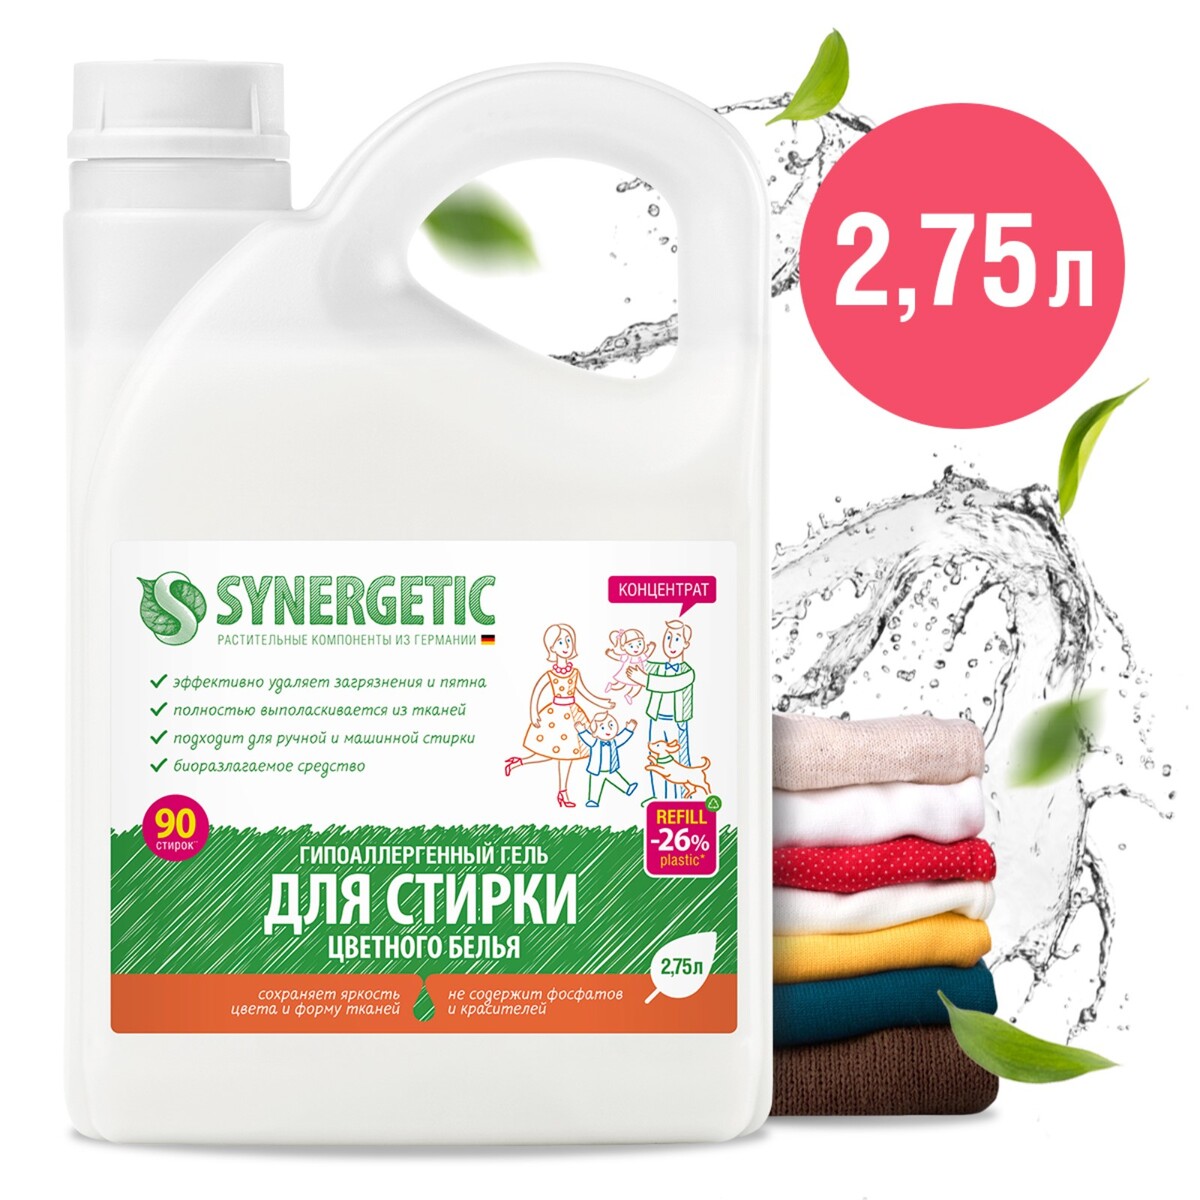     synergetic, ,   , , 2.75 